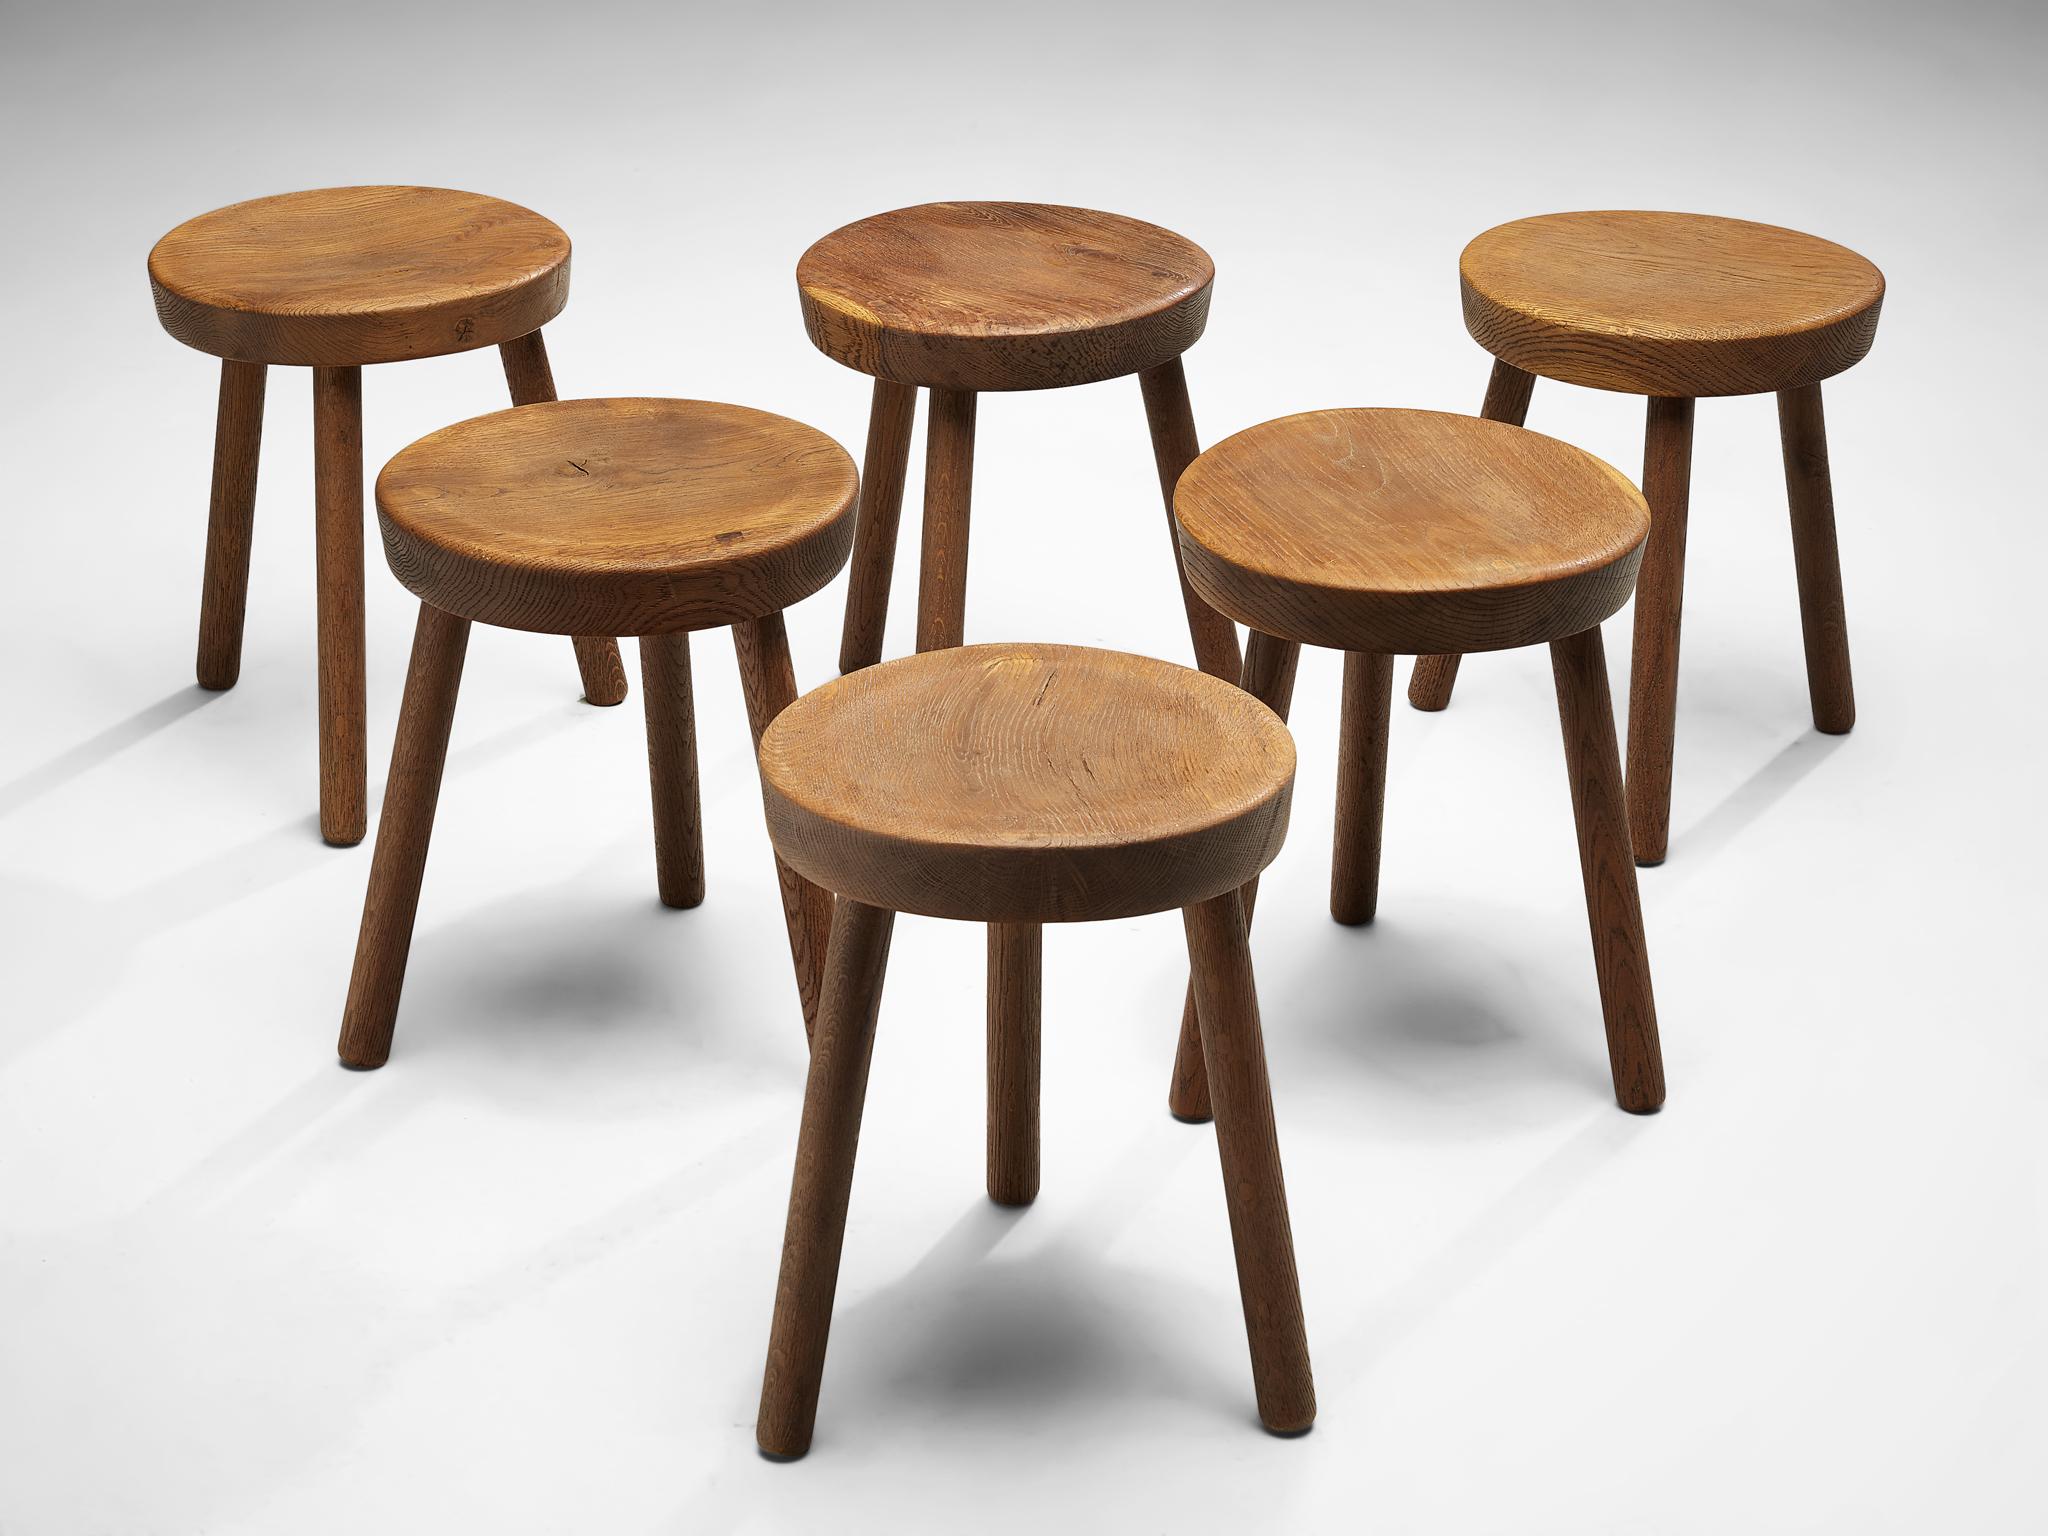 Large set of tripod stools or side tables, solid oak, Switzerland, 1960s-1970s.

Beautiful crafted oak stools originating from the exhibition center in St. Gallen, Switzerland. The seat is handcrafted to have a small dip for better comfort. With